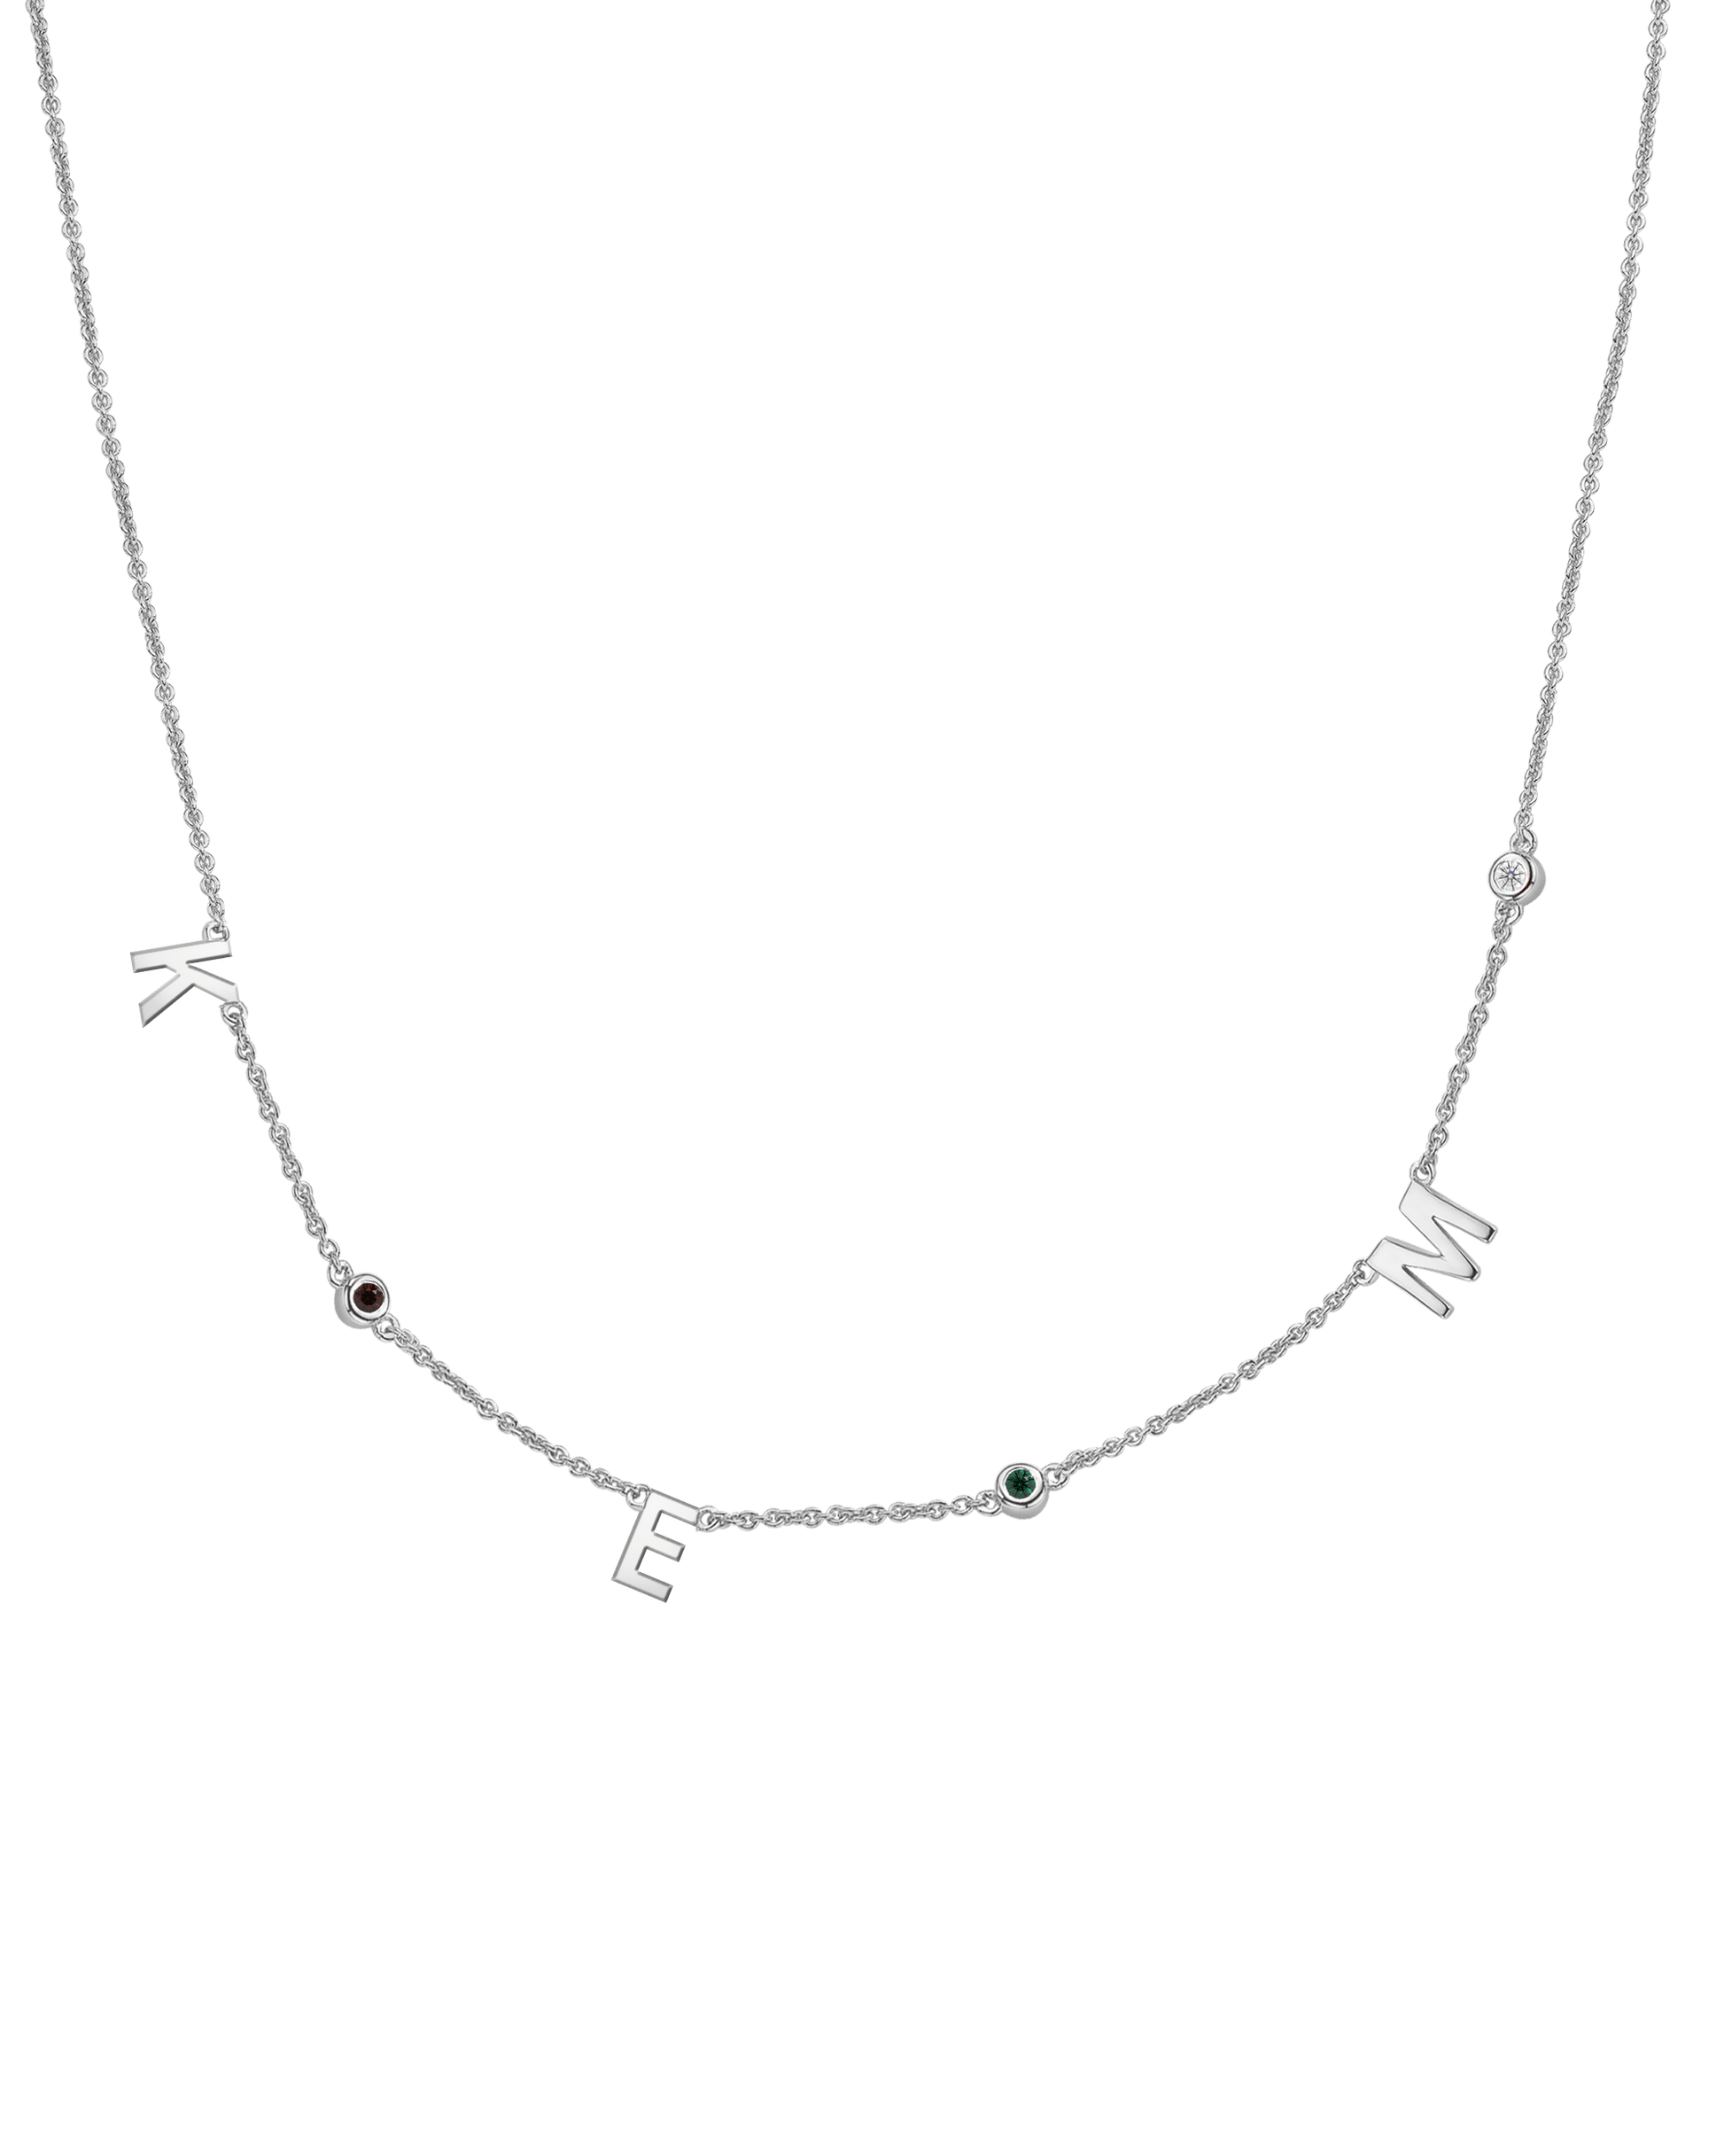 Initial Birthstone Necklace - 925 Sterling Silver Necklaces magal-dev 3 Initials + 3 Birthstones Adjustable 16-17" (40cm-43cm) 